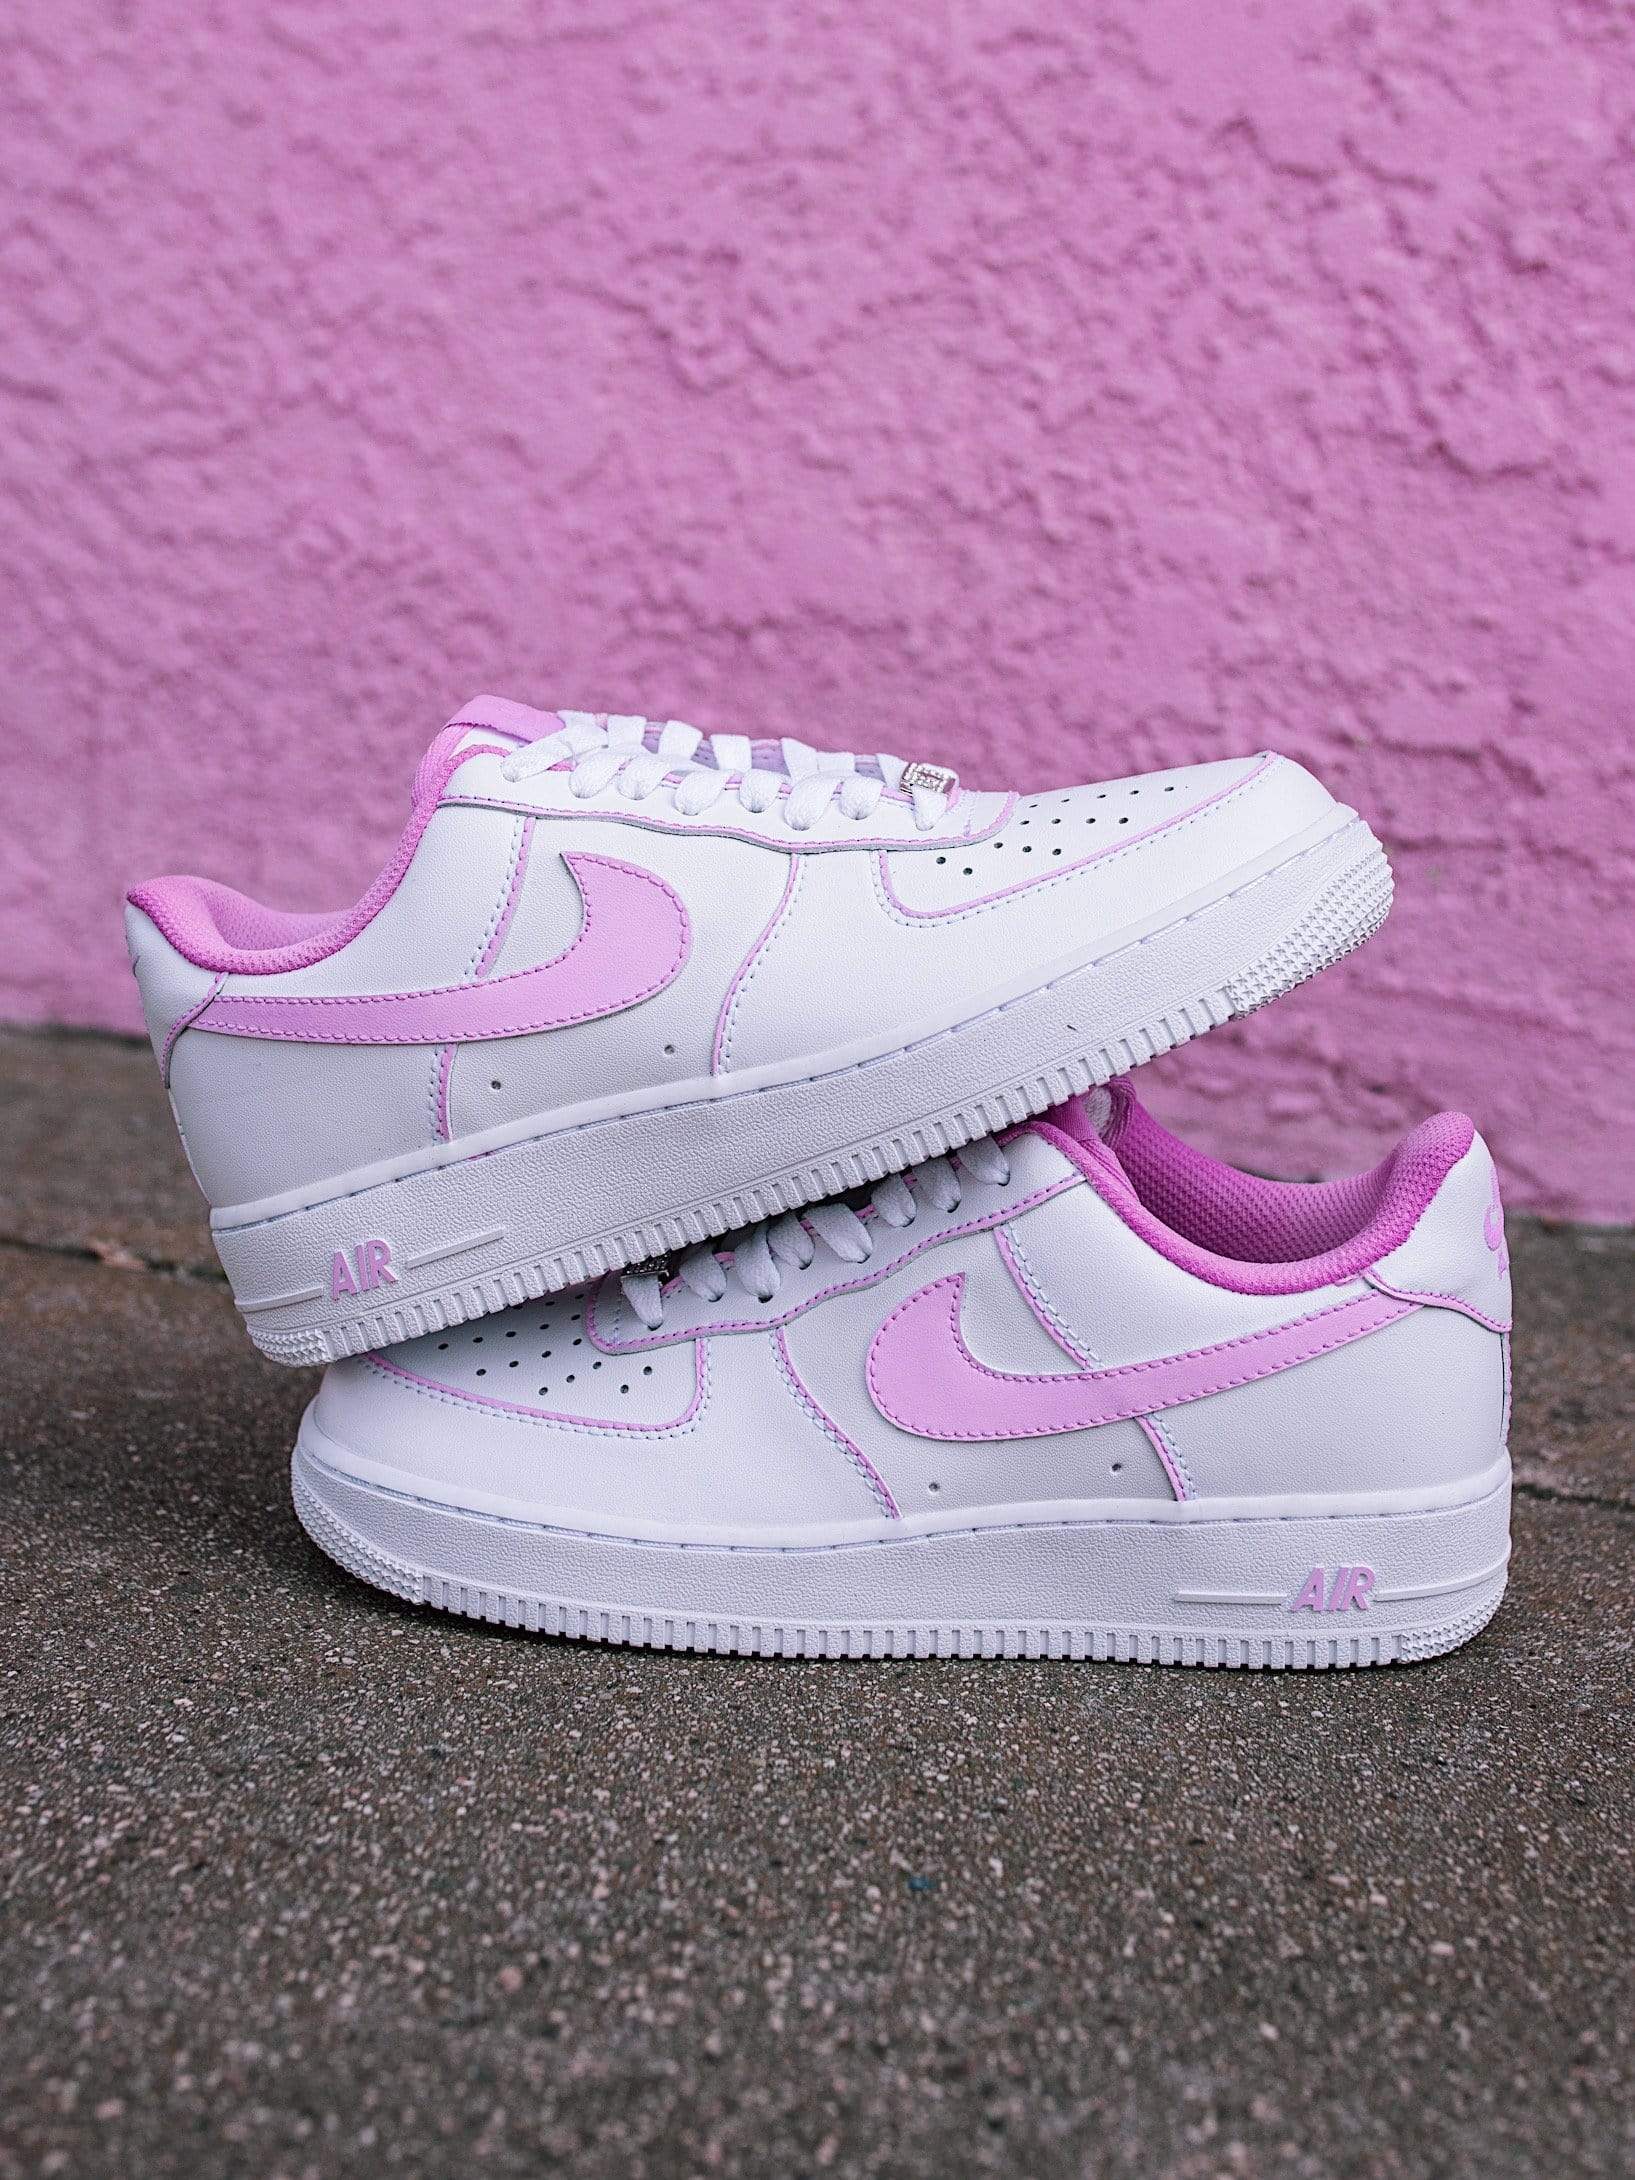 Moody Mood Collection AF1 Pink Outline Air Force 1